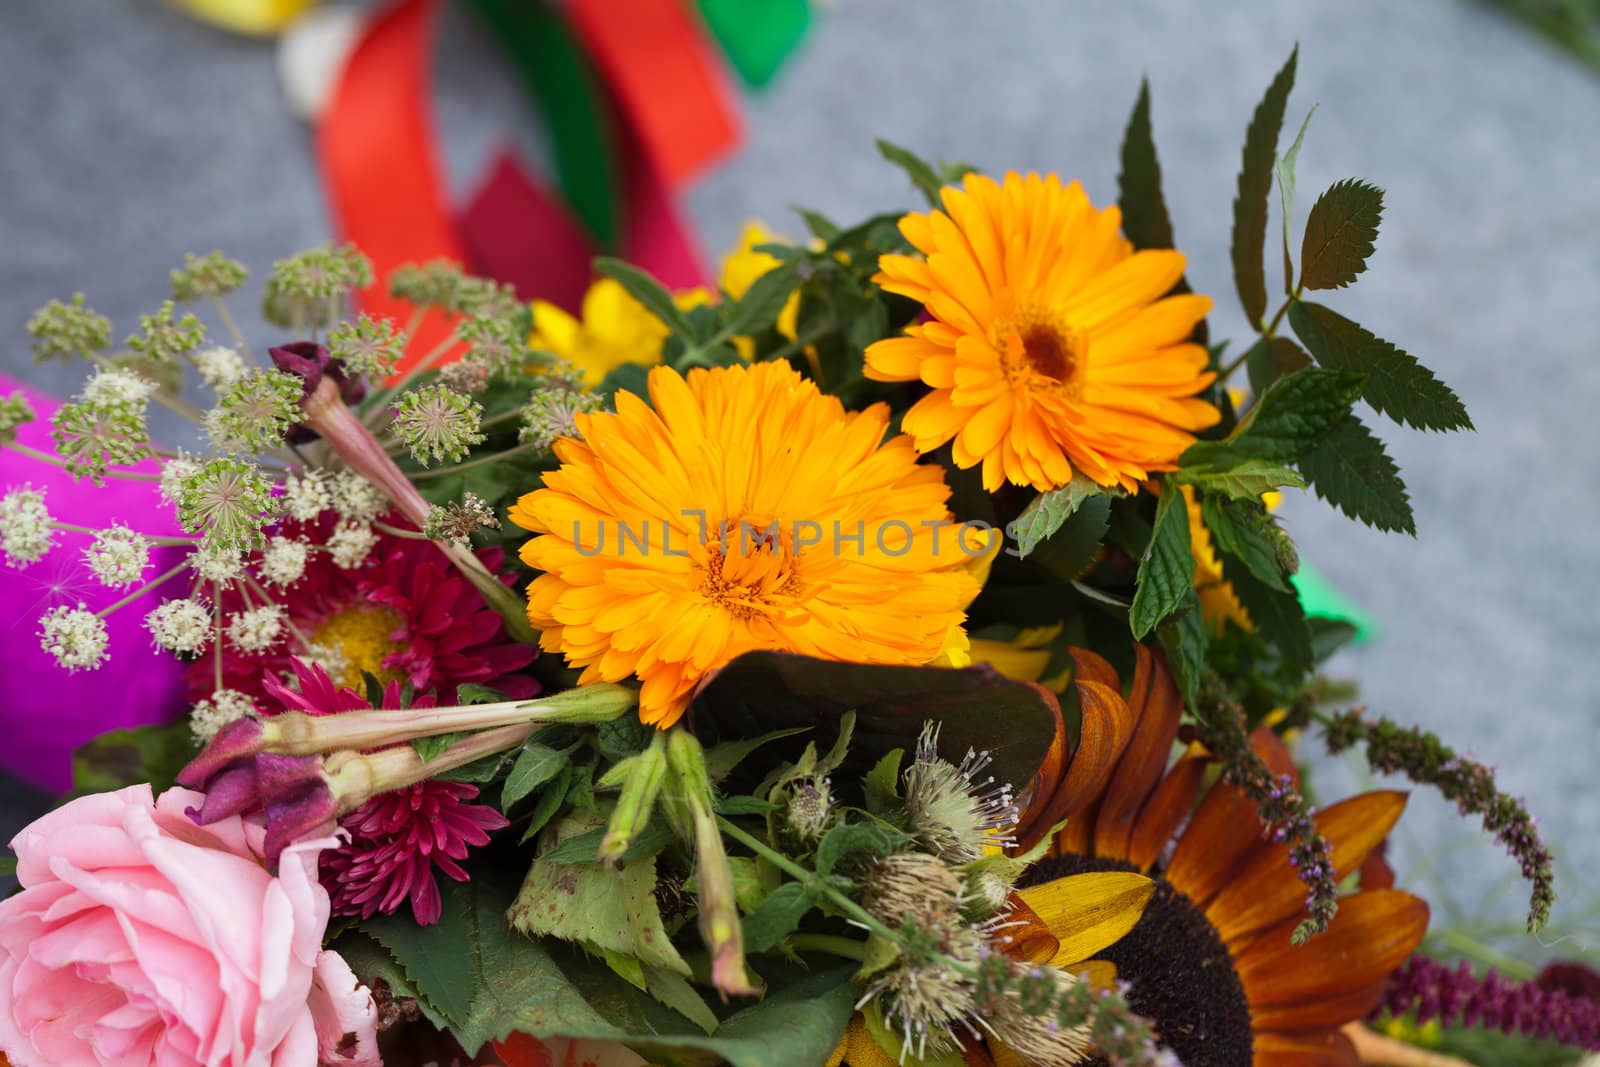 beautiful bouquets of flowers and herbs by wjarek